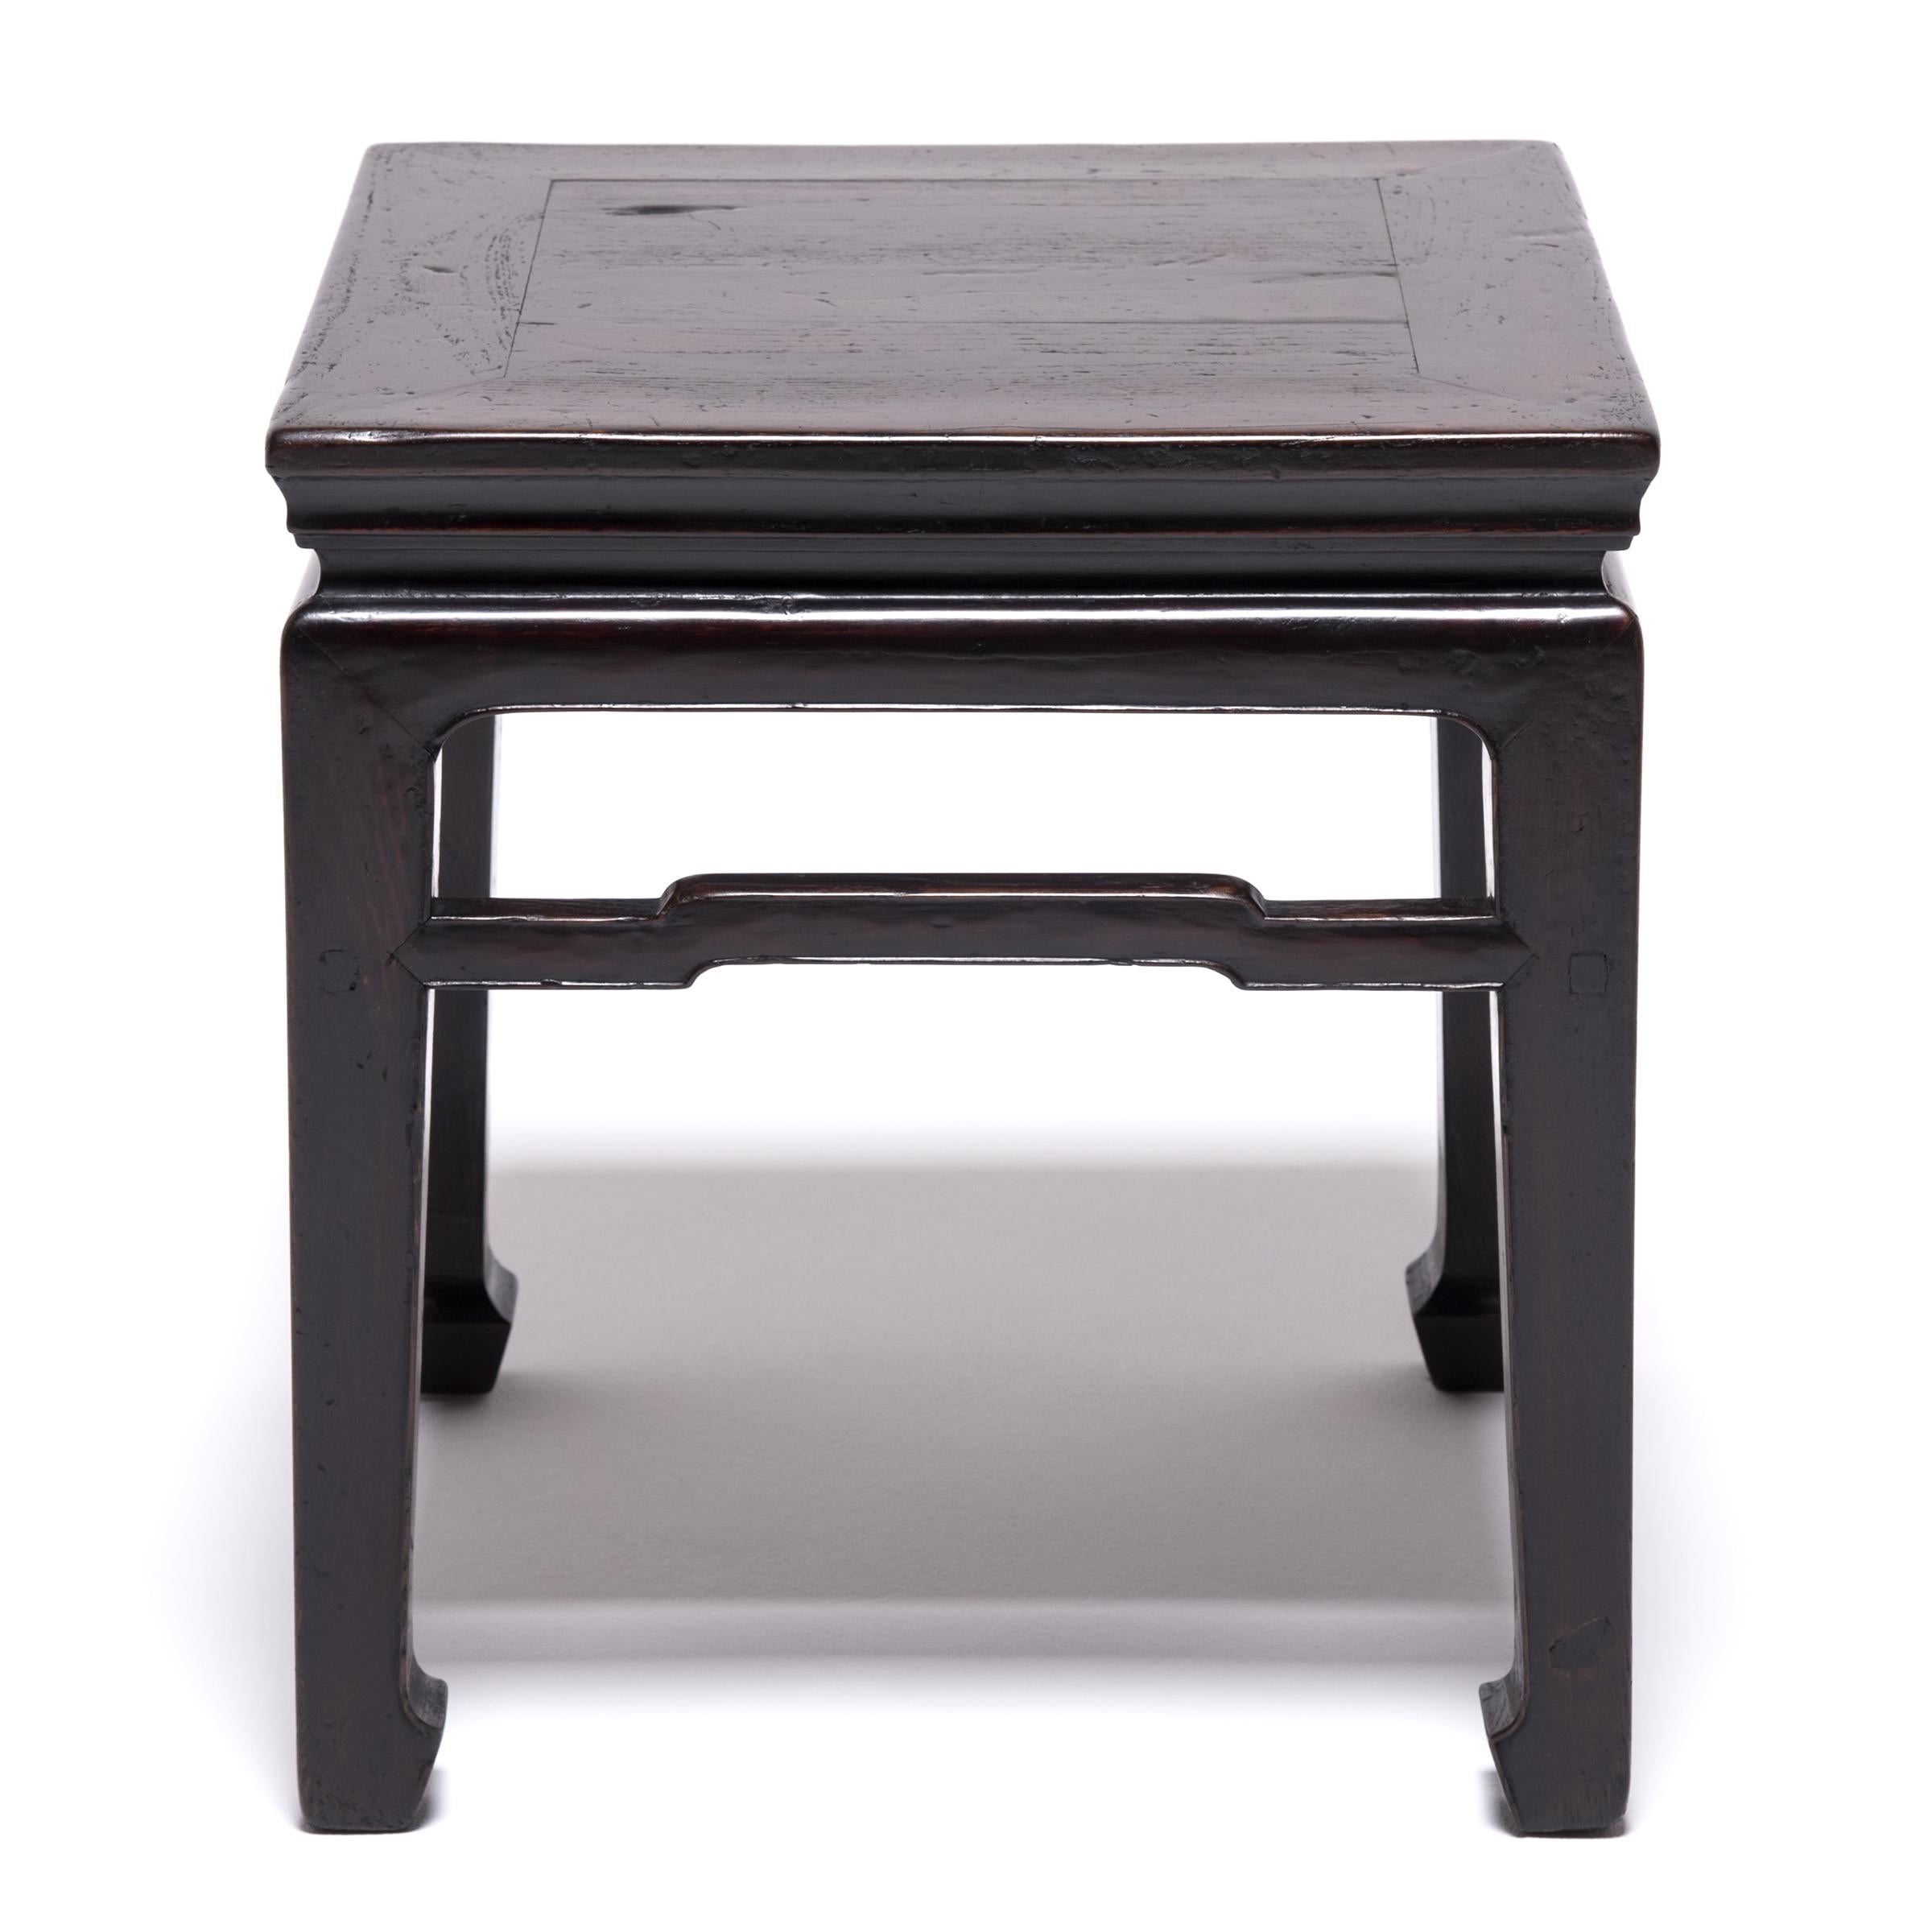 Much more portable than heavier chairs, stools would be pulled up for use at mealtimes or used in an outside courtyard or garden. Crafted in the classical Chinese style of simple lines and natural beauty, this square stool (fang deng) was made in